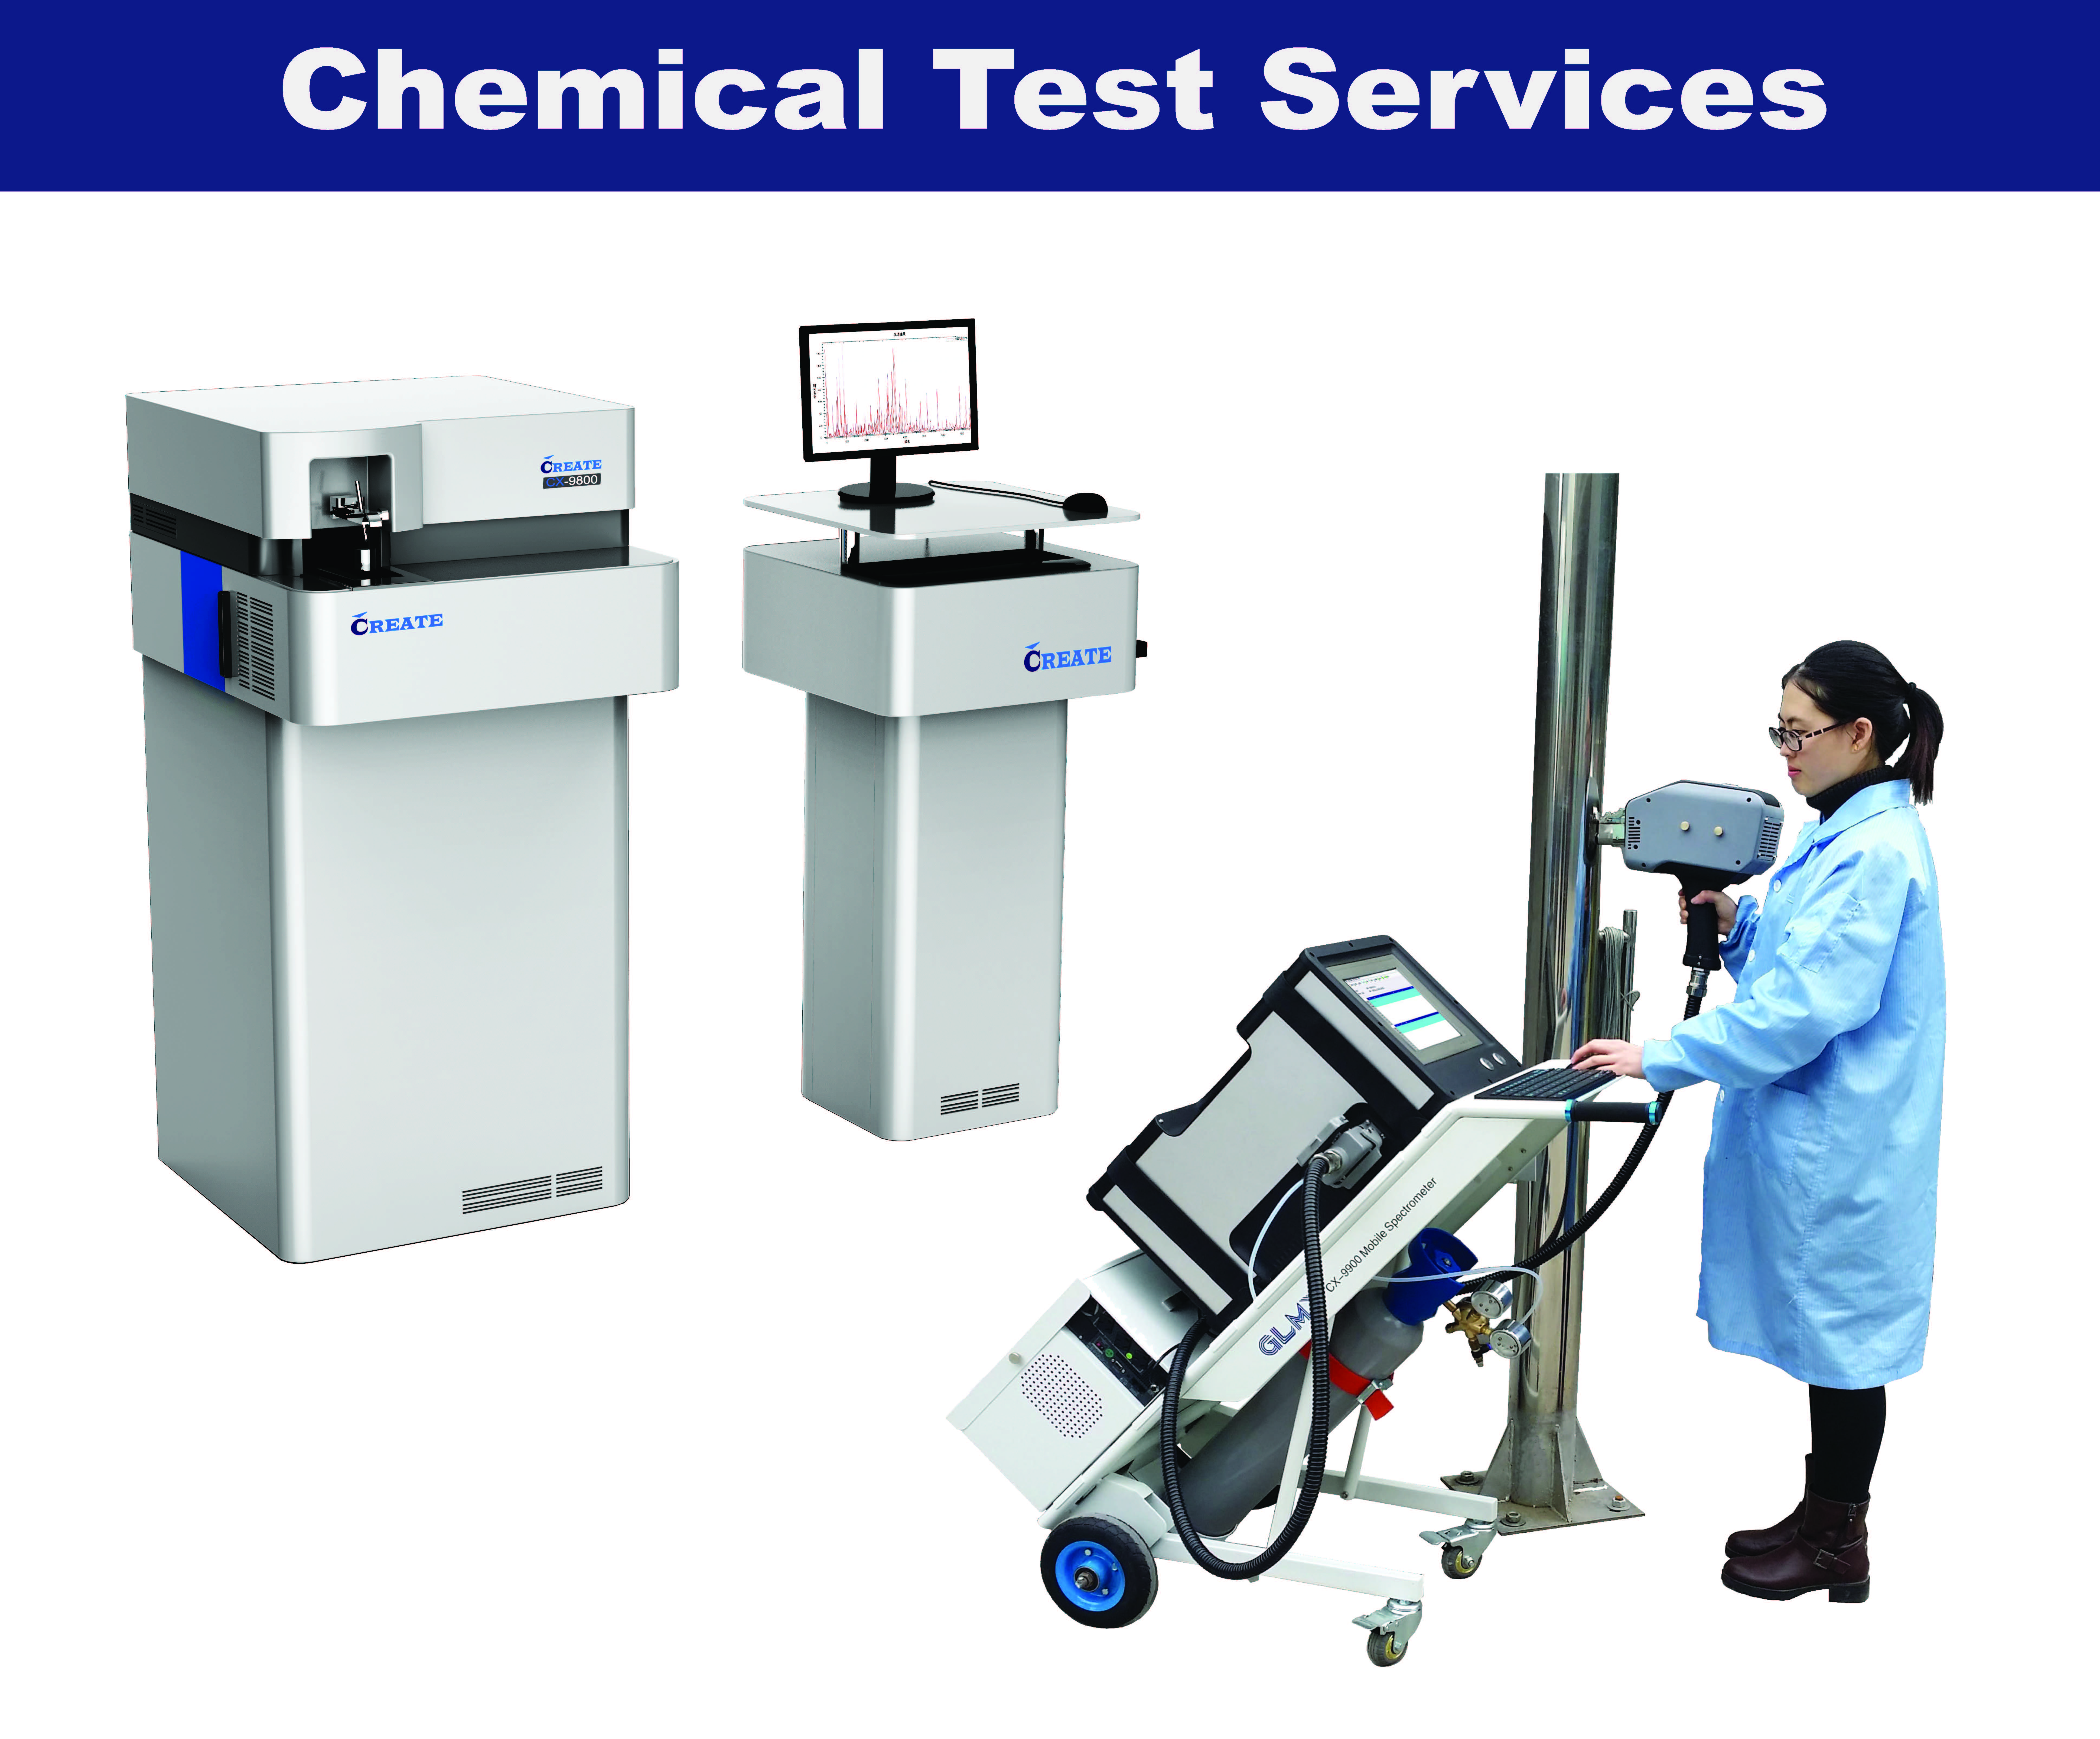 Chemical Test Services